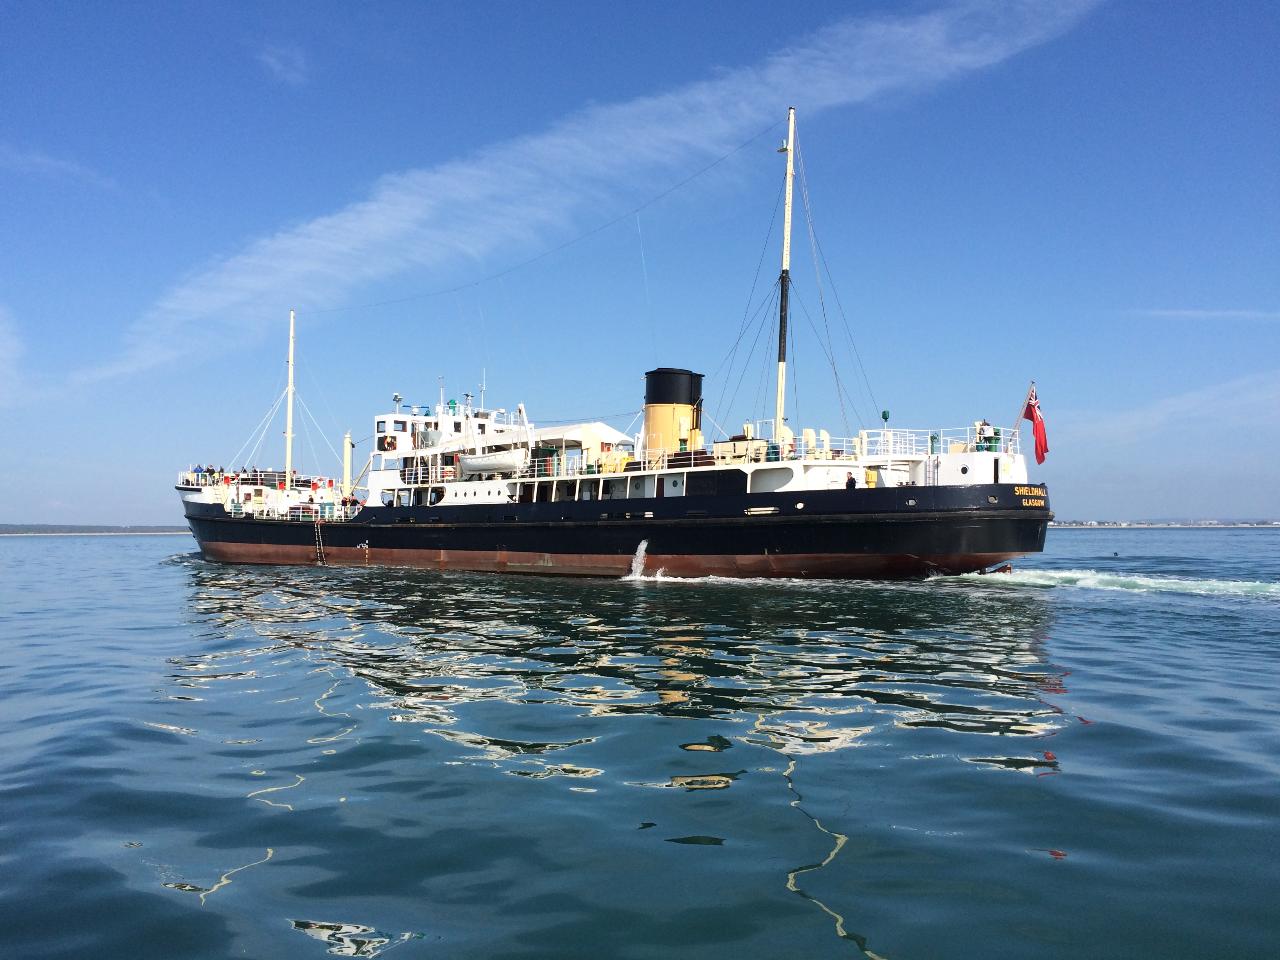 SS Shieldhall - Southampton to Poole with Stompers Jazz Band - Mon 29th Aug 2022